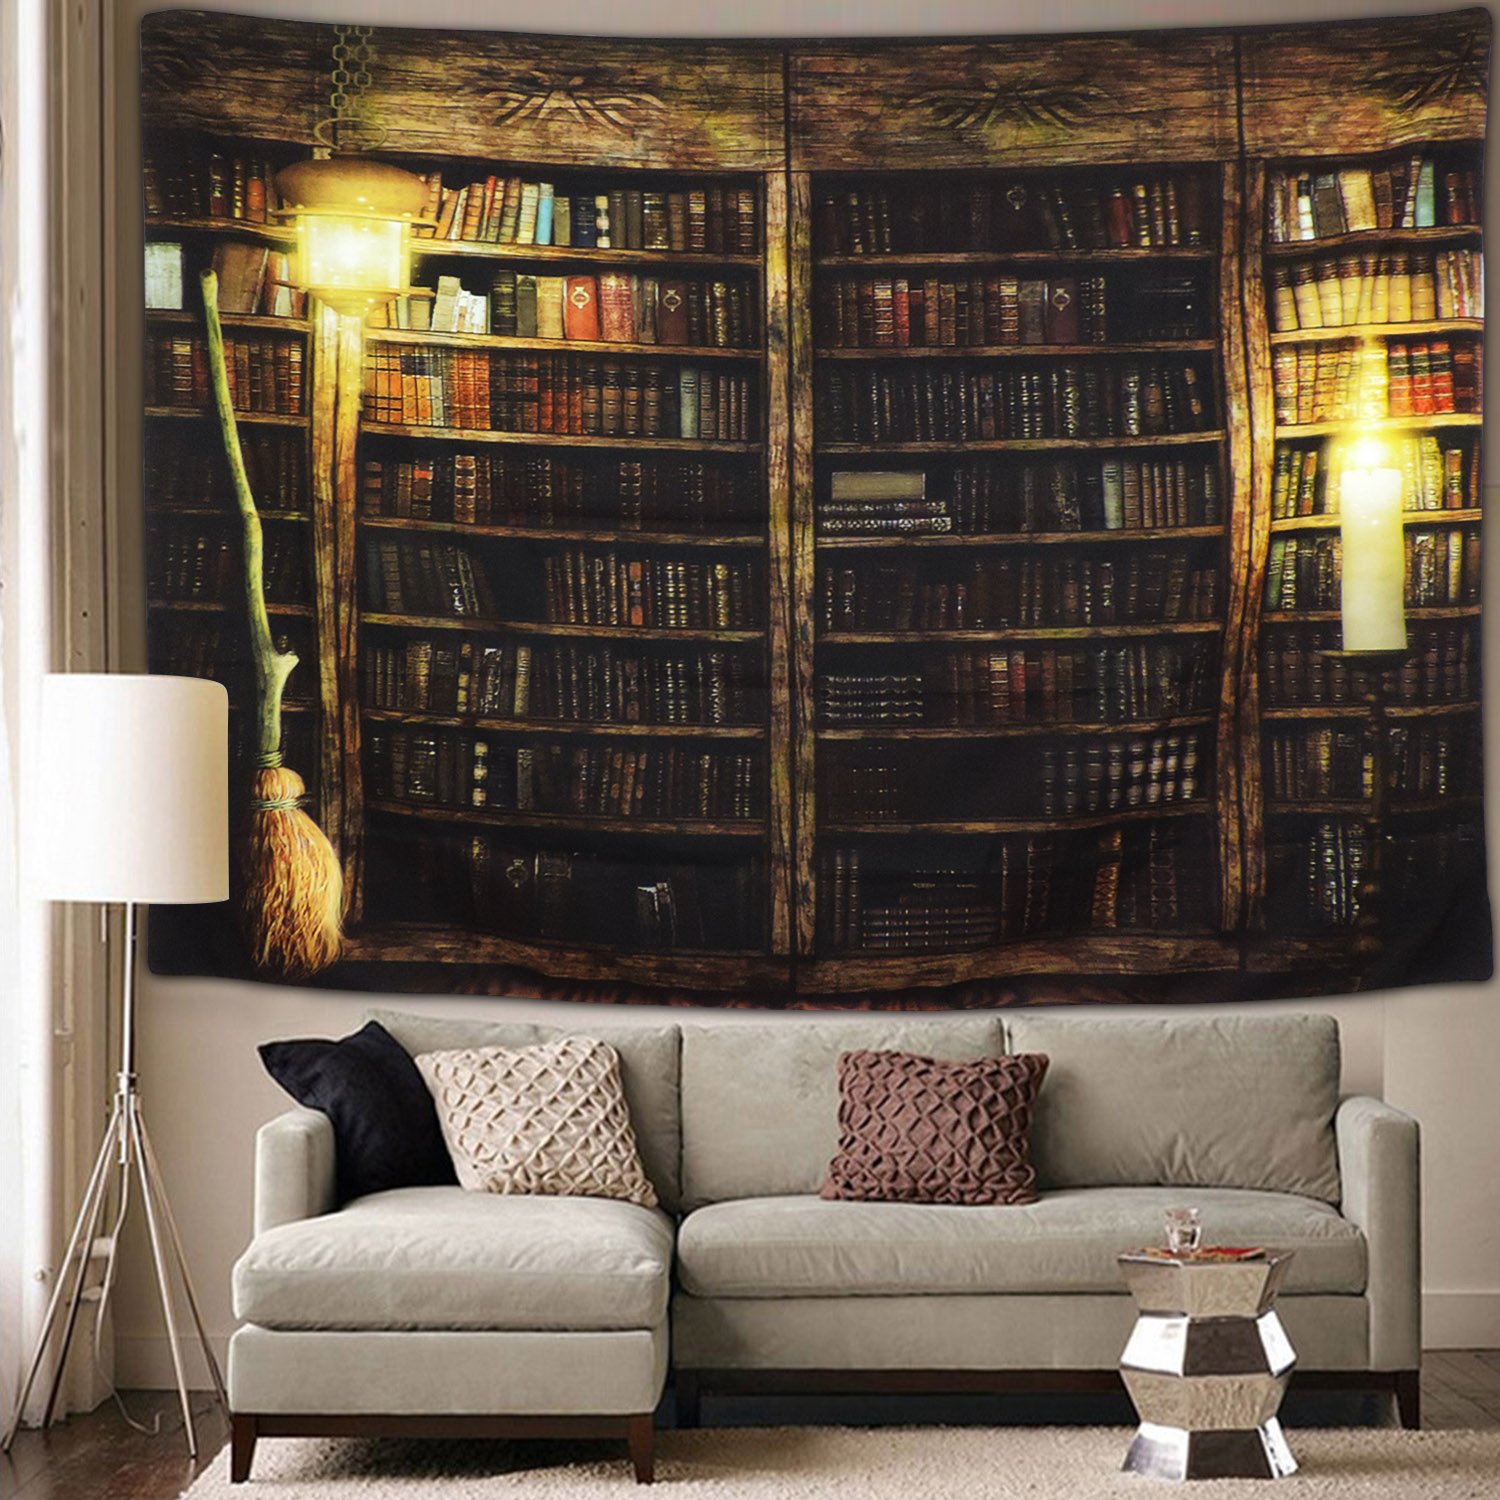 Book Cover Sunm Boutique Vintage Library Bookshelf Tapestry Wall Hanging Study Room Picture Art Print Tapestry Retro Bookshelf Wall Art Bohemian Hippie Wall Tapestries for Bedroom College Dorm Decor